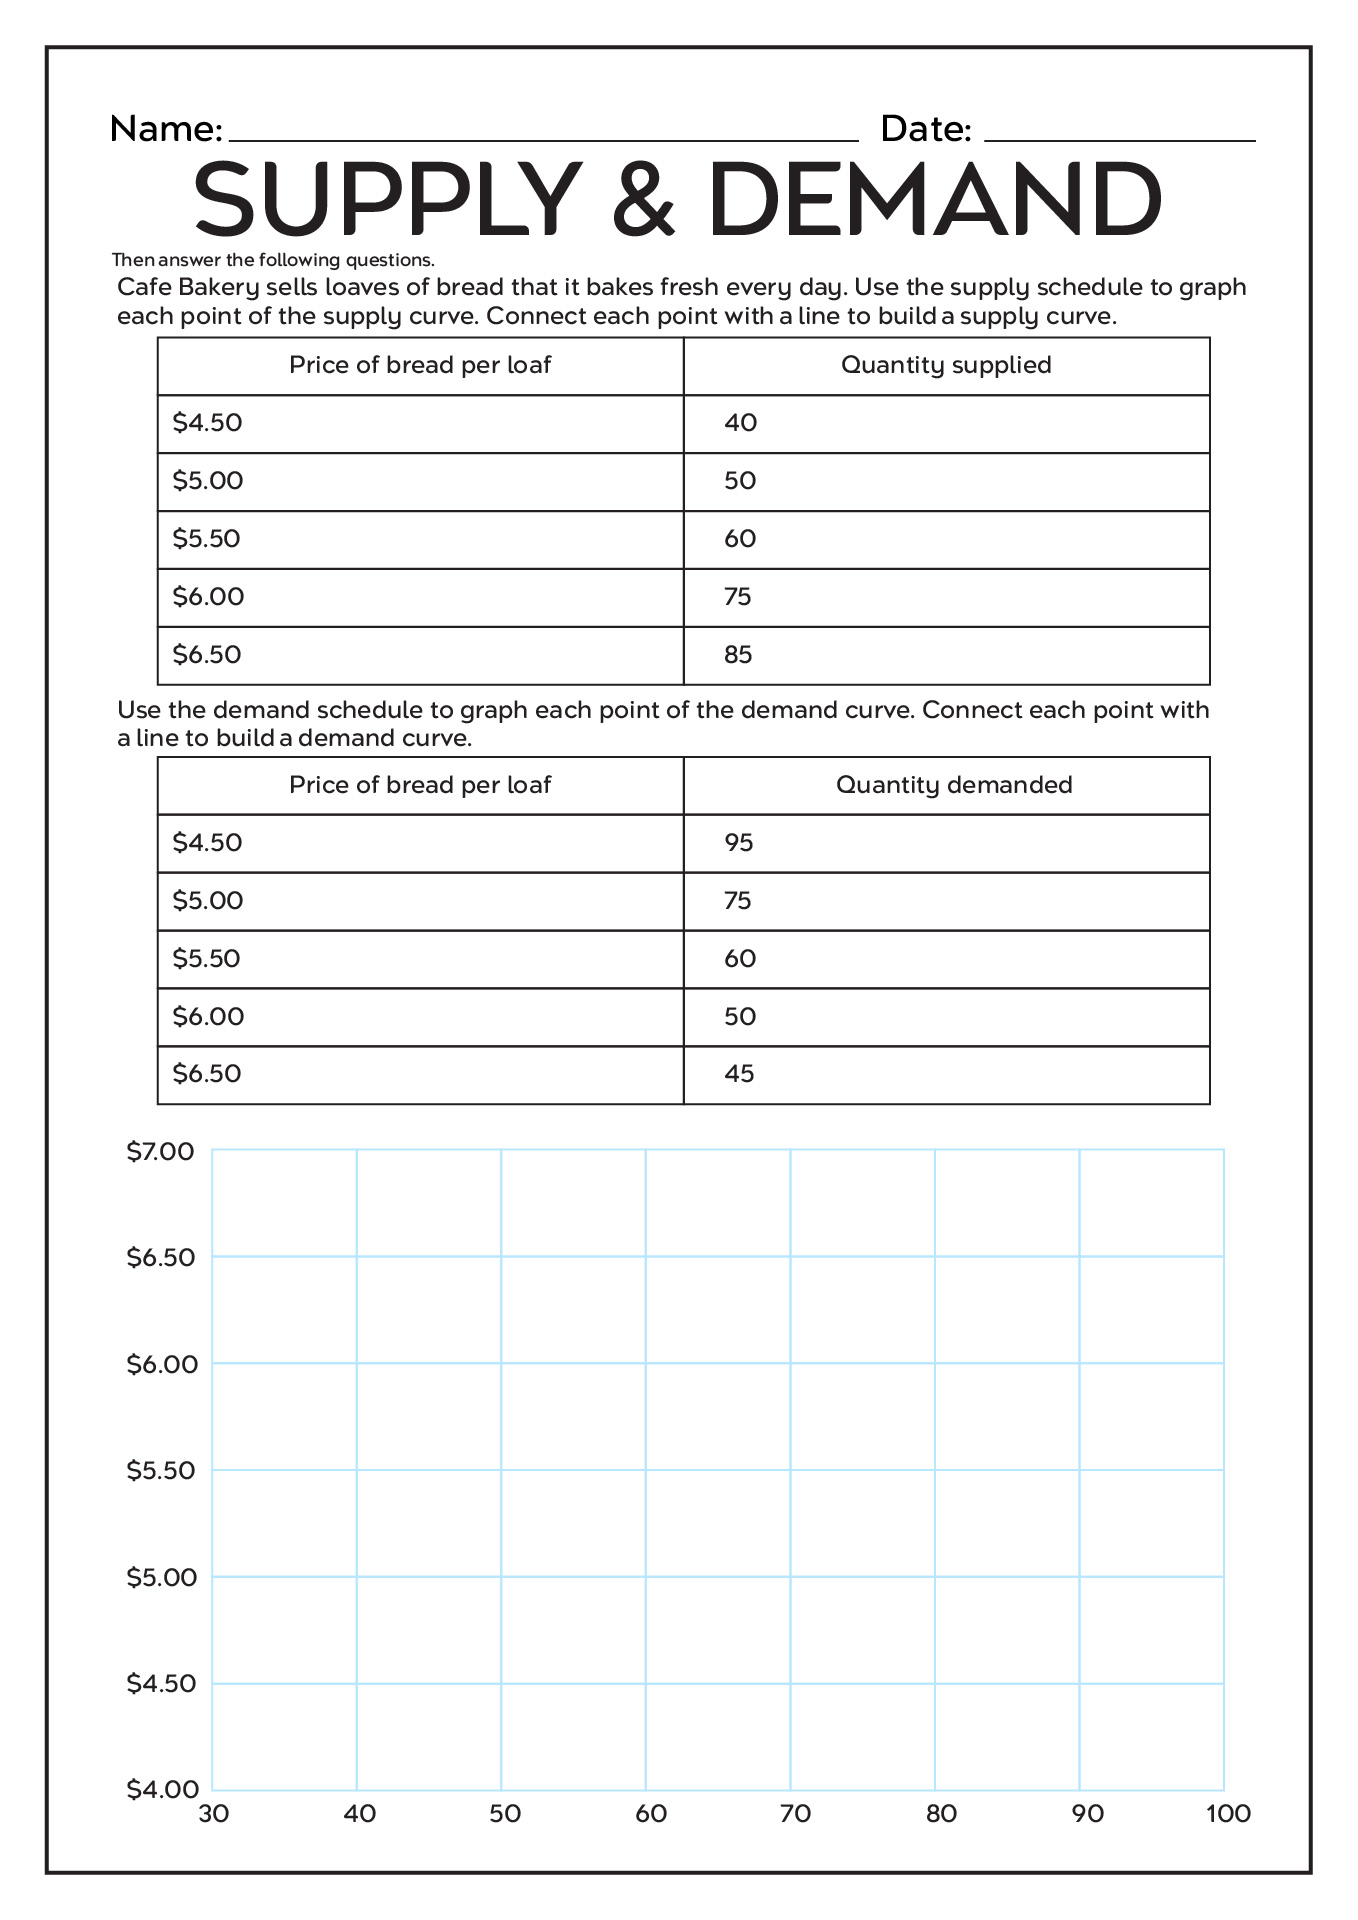 Supply and Demand Curves Worksheets Image